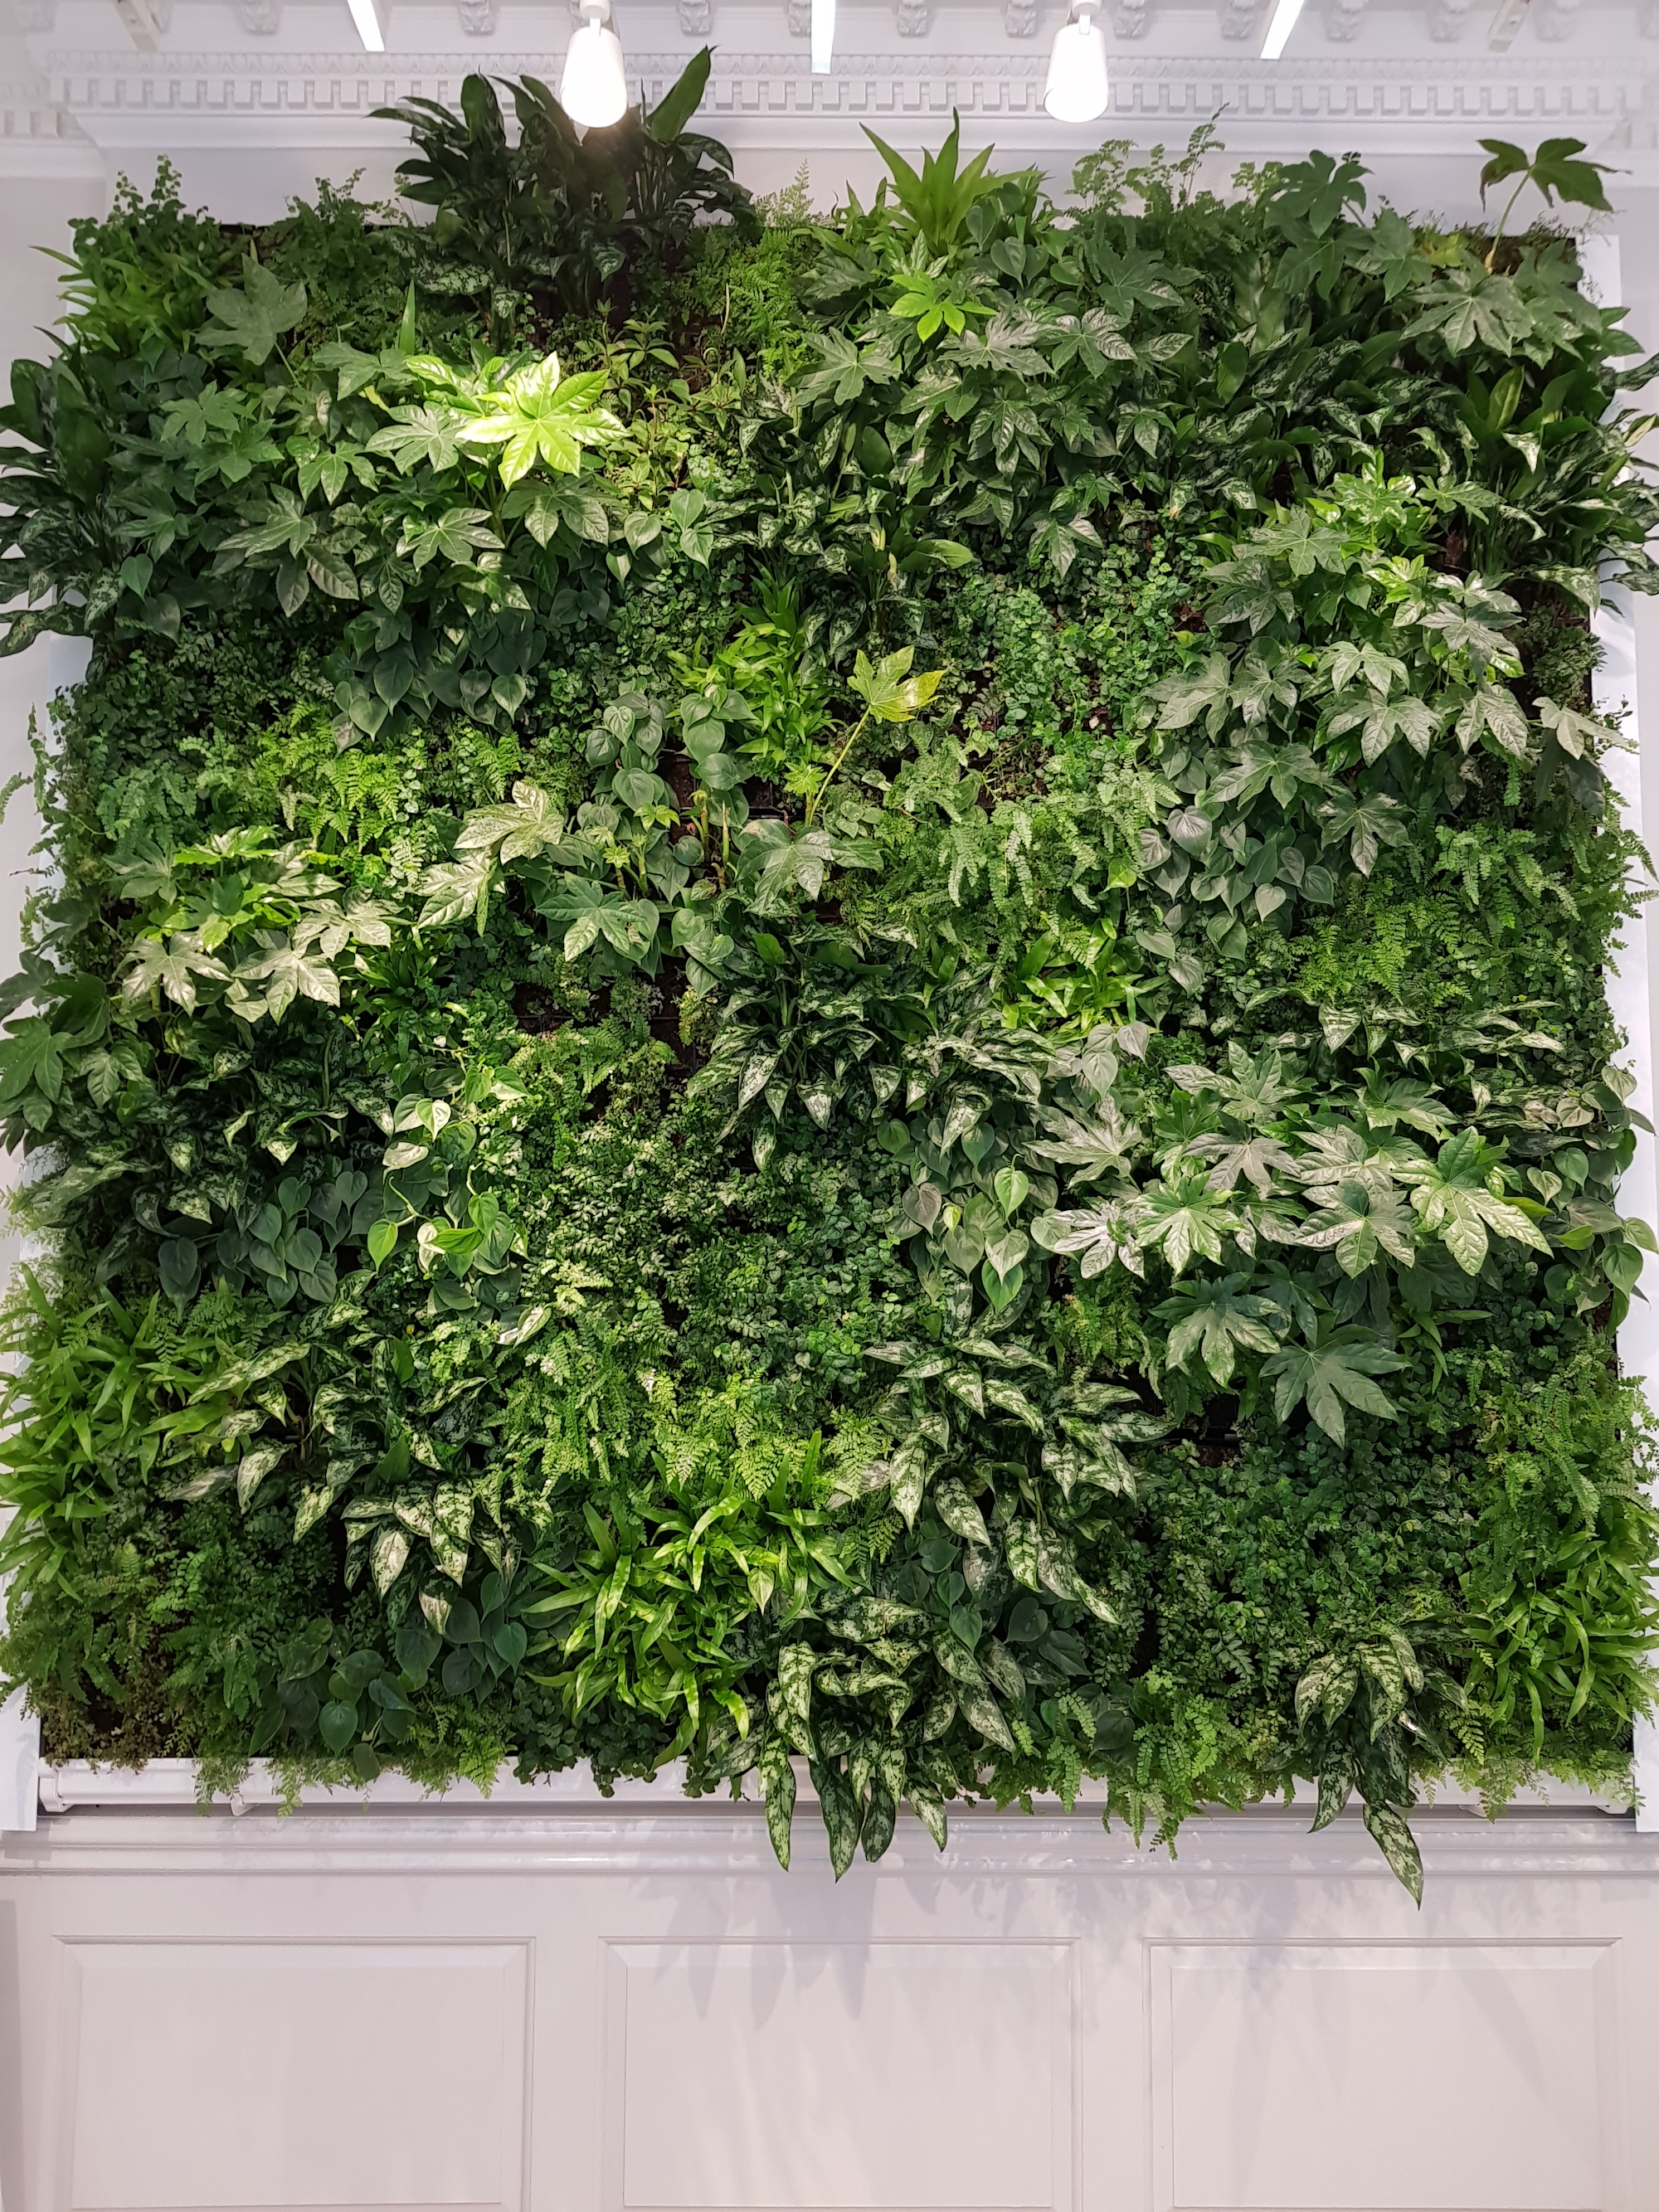 One Of The Lush Living Walls At Melissa Galeria In London's Covent Garden